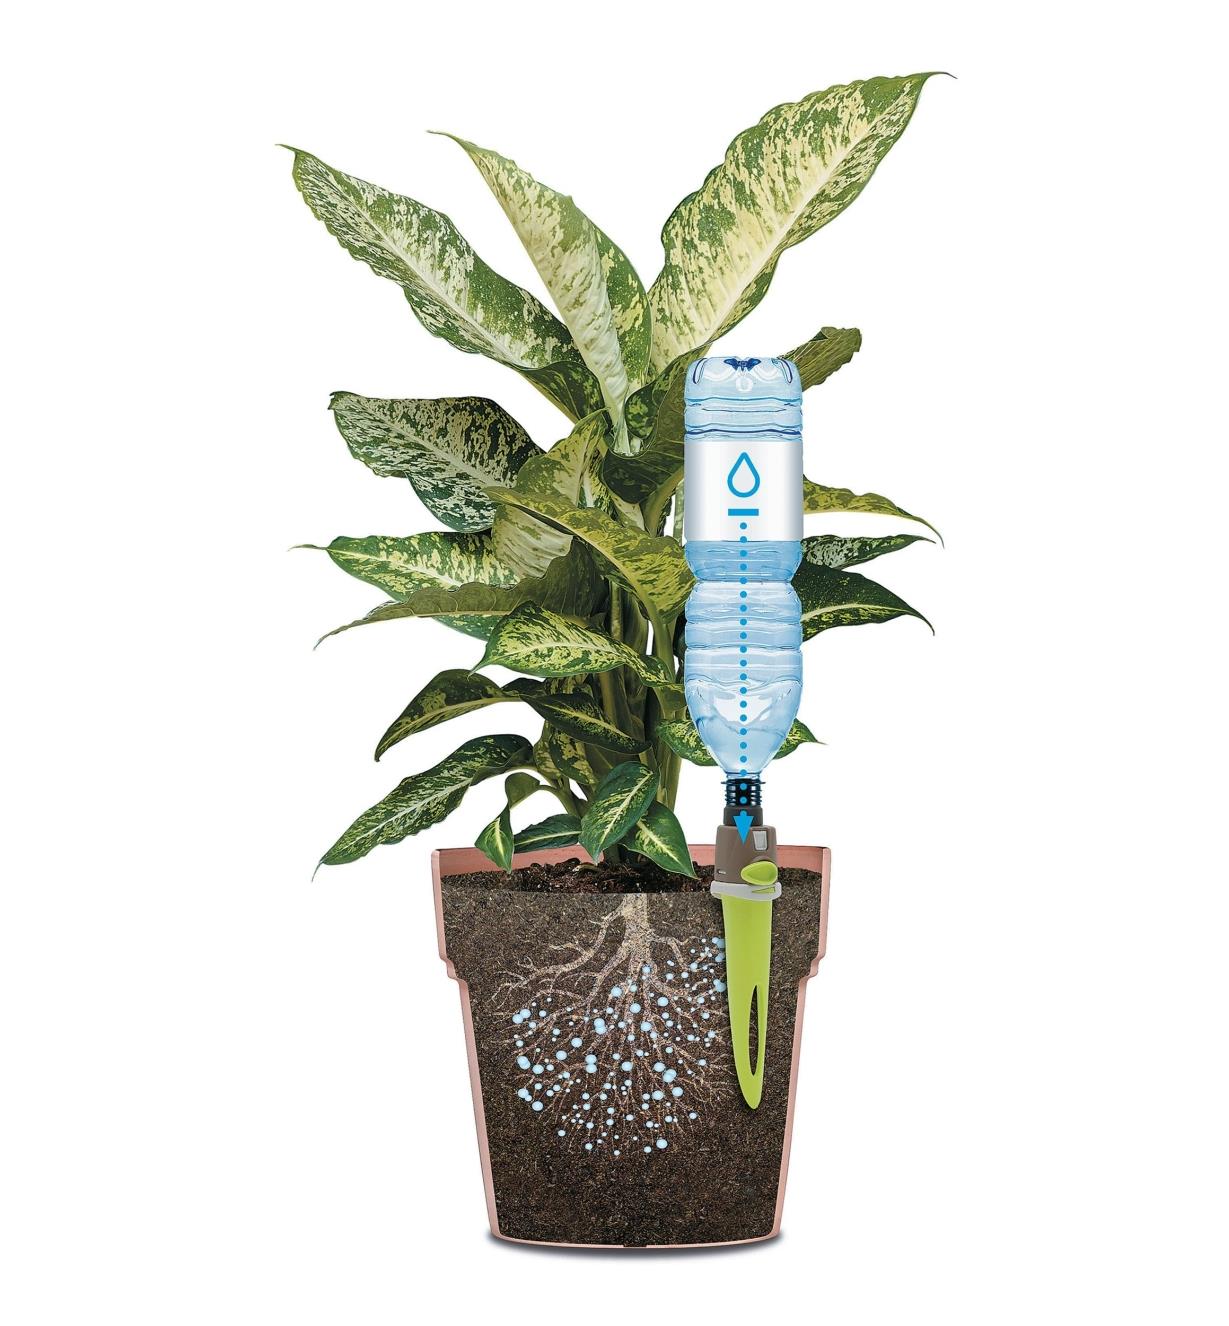 Cutaway illustration of adjustable-flow drip spike with a water bottle inserted in a plant pot